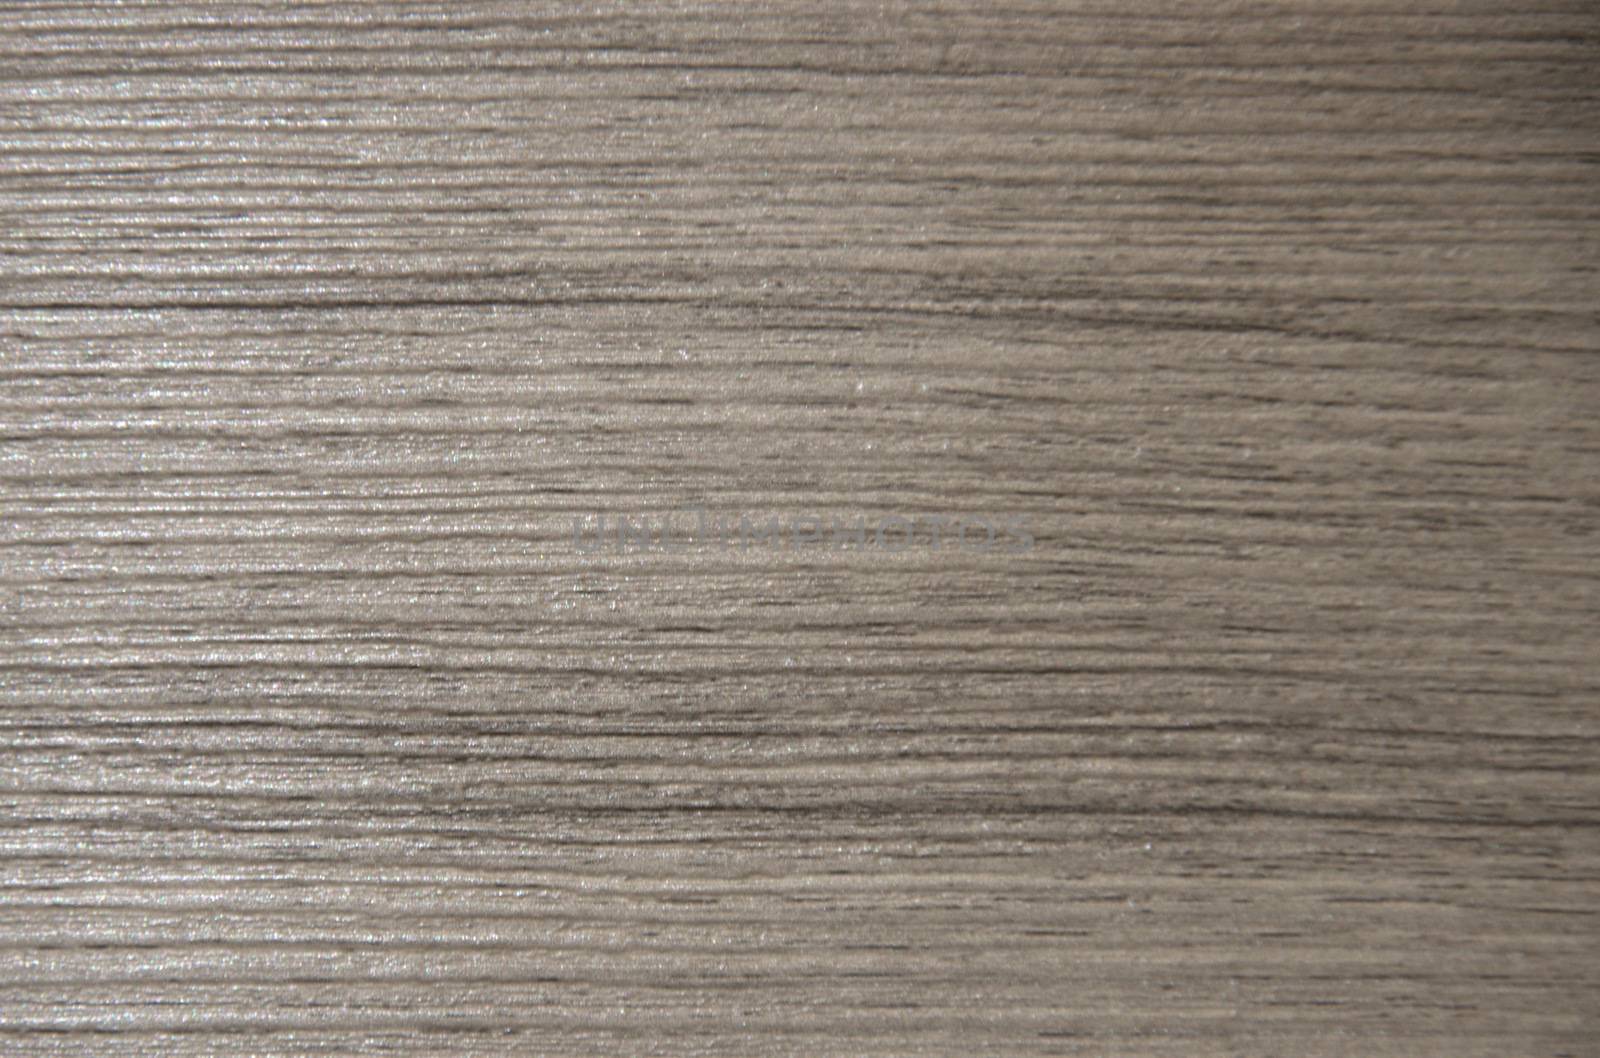 Black Oak The structure of sawed wood. Background, texture, natural pattern.